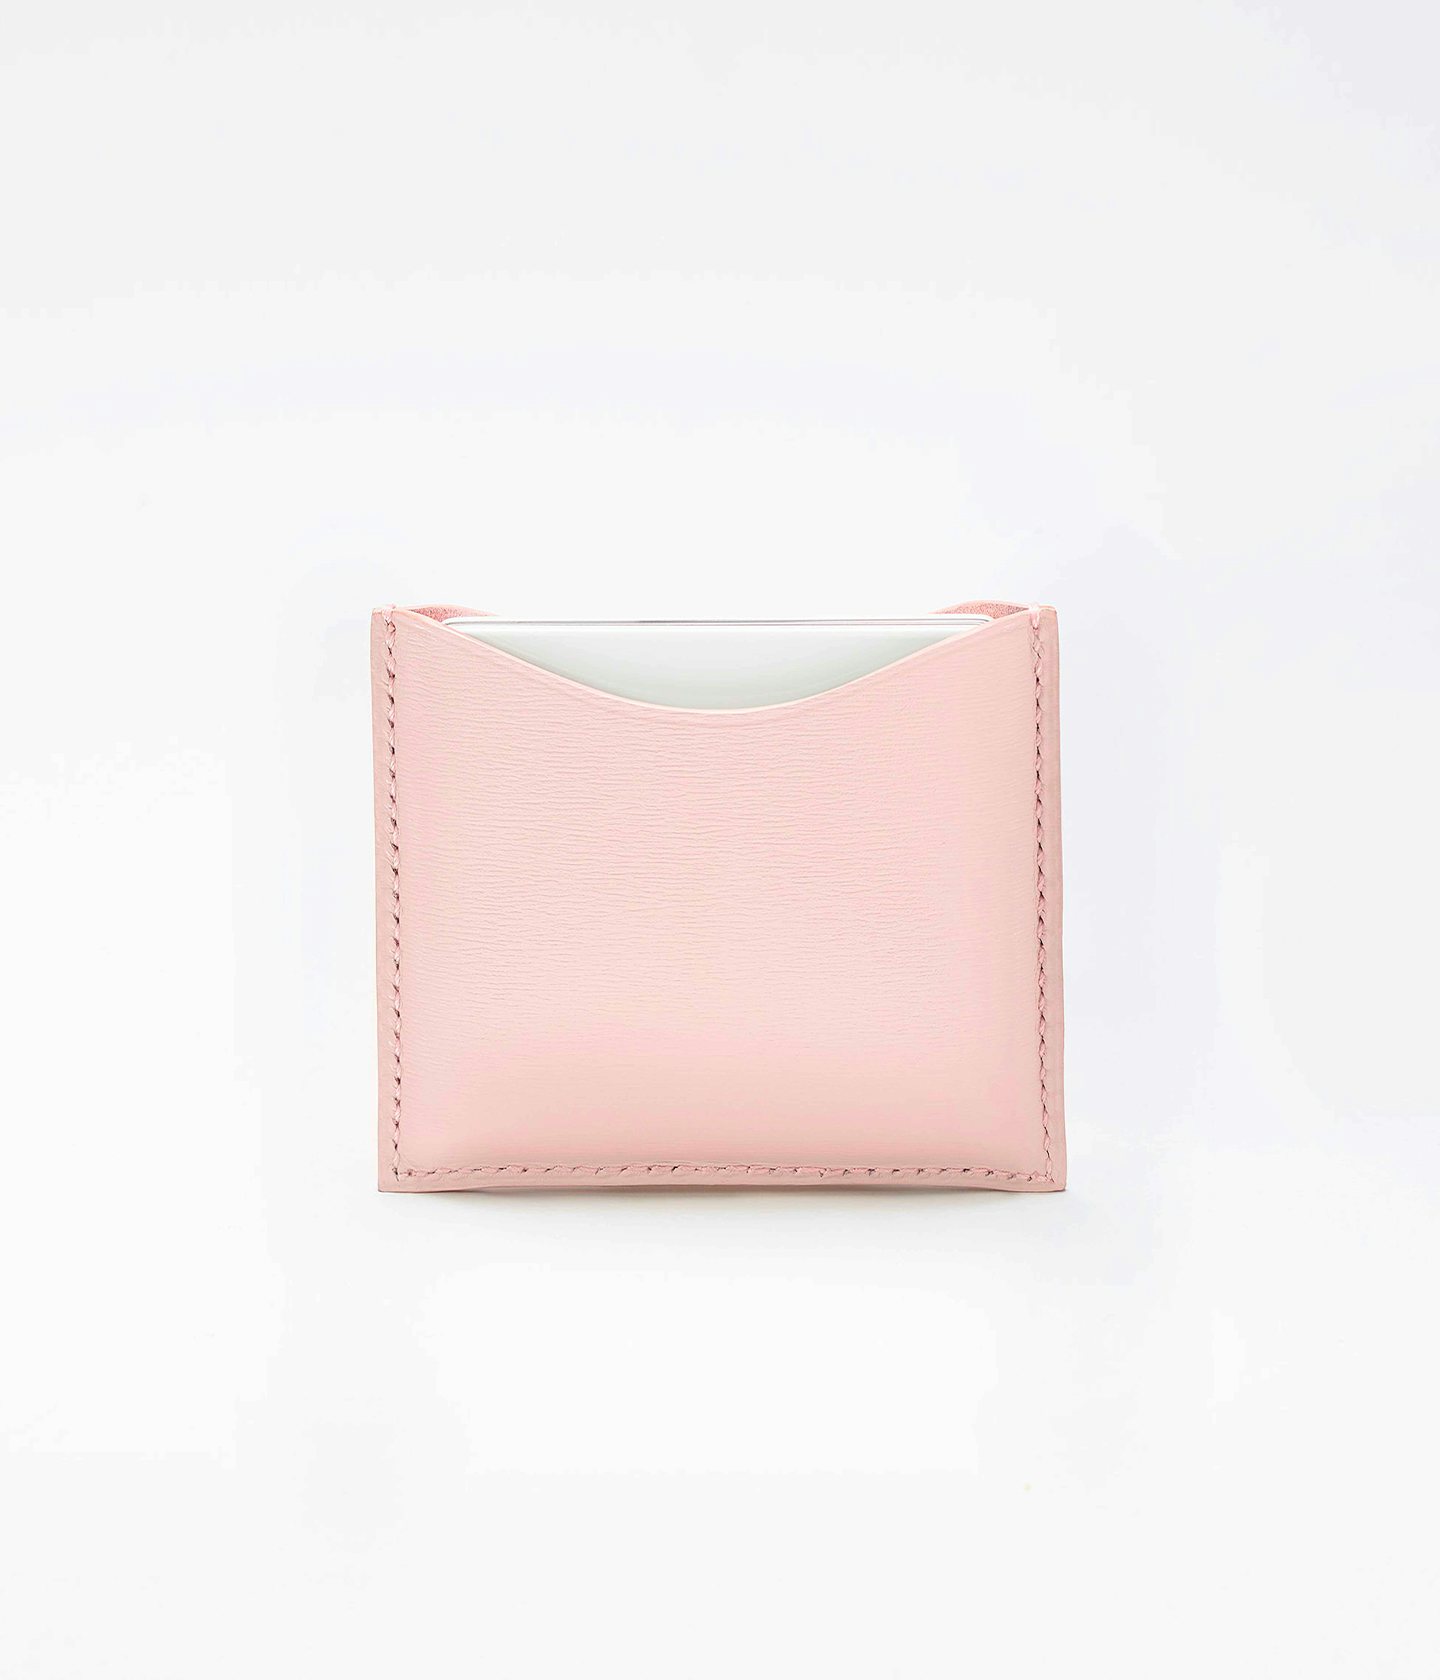 La bouche rouge upcycled fine leather compact case in Pink